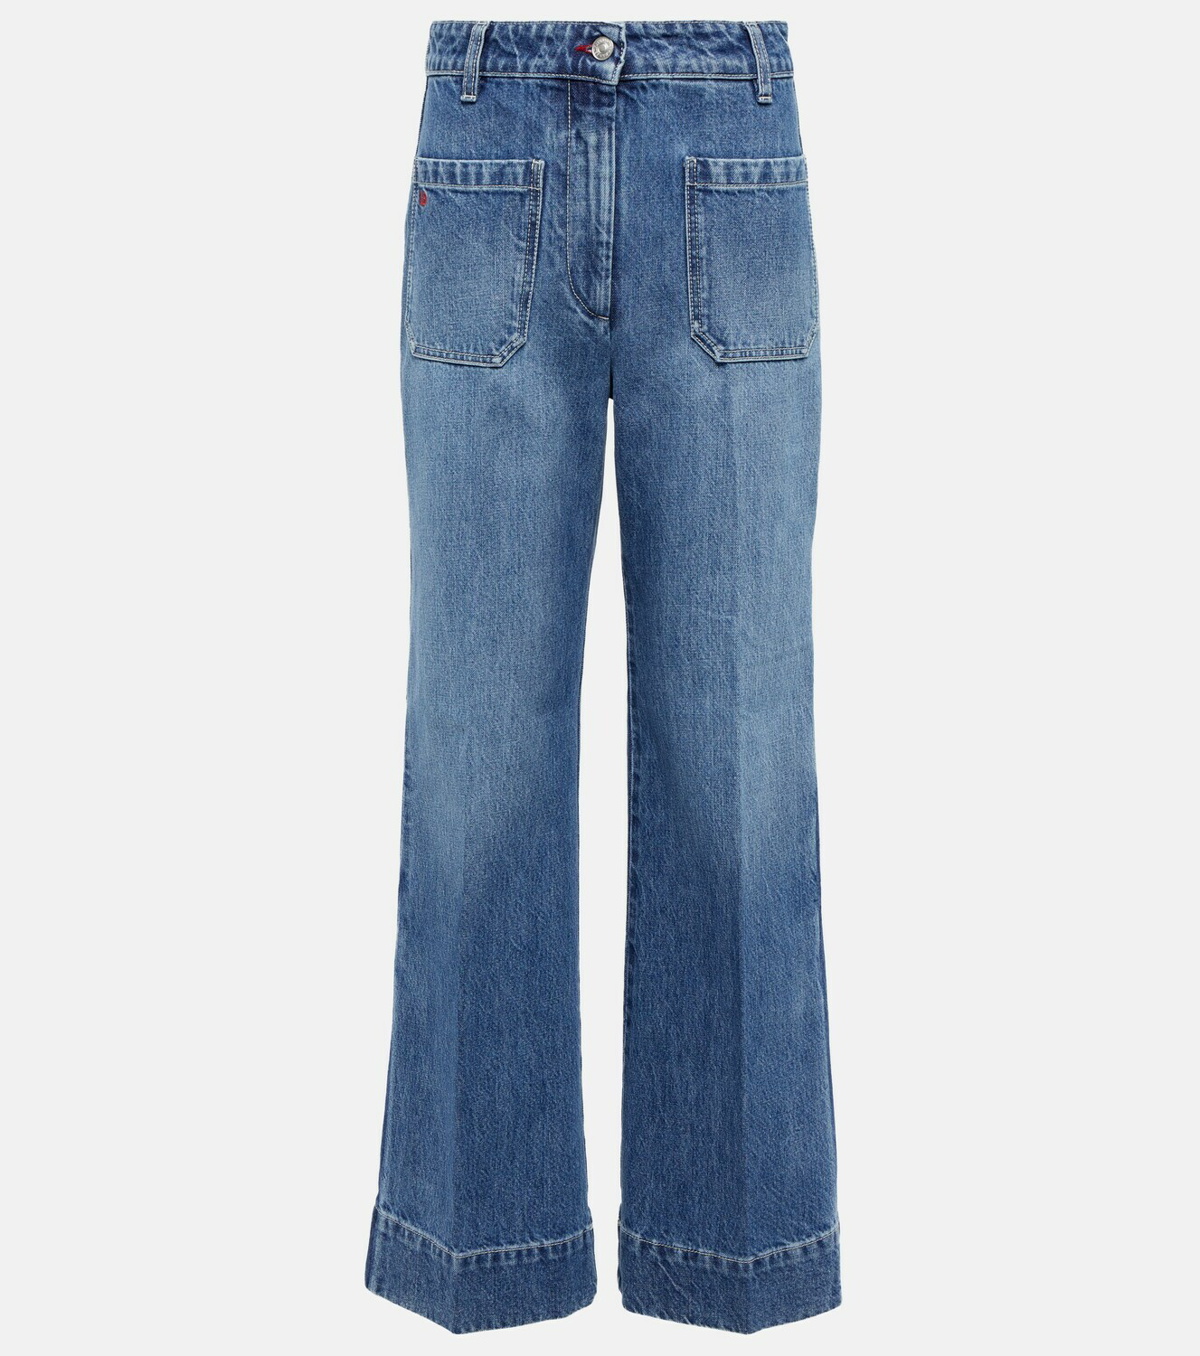 Victoria Beckham Twisted Jeans 28 at FORZIERI